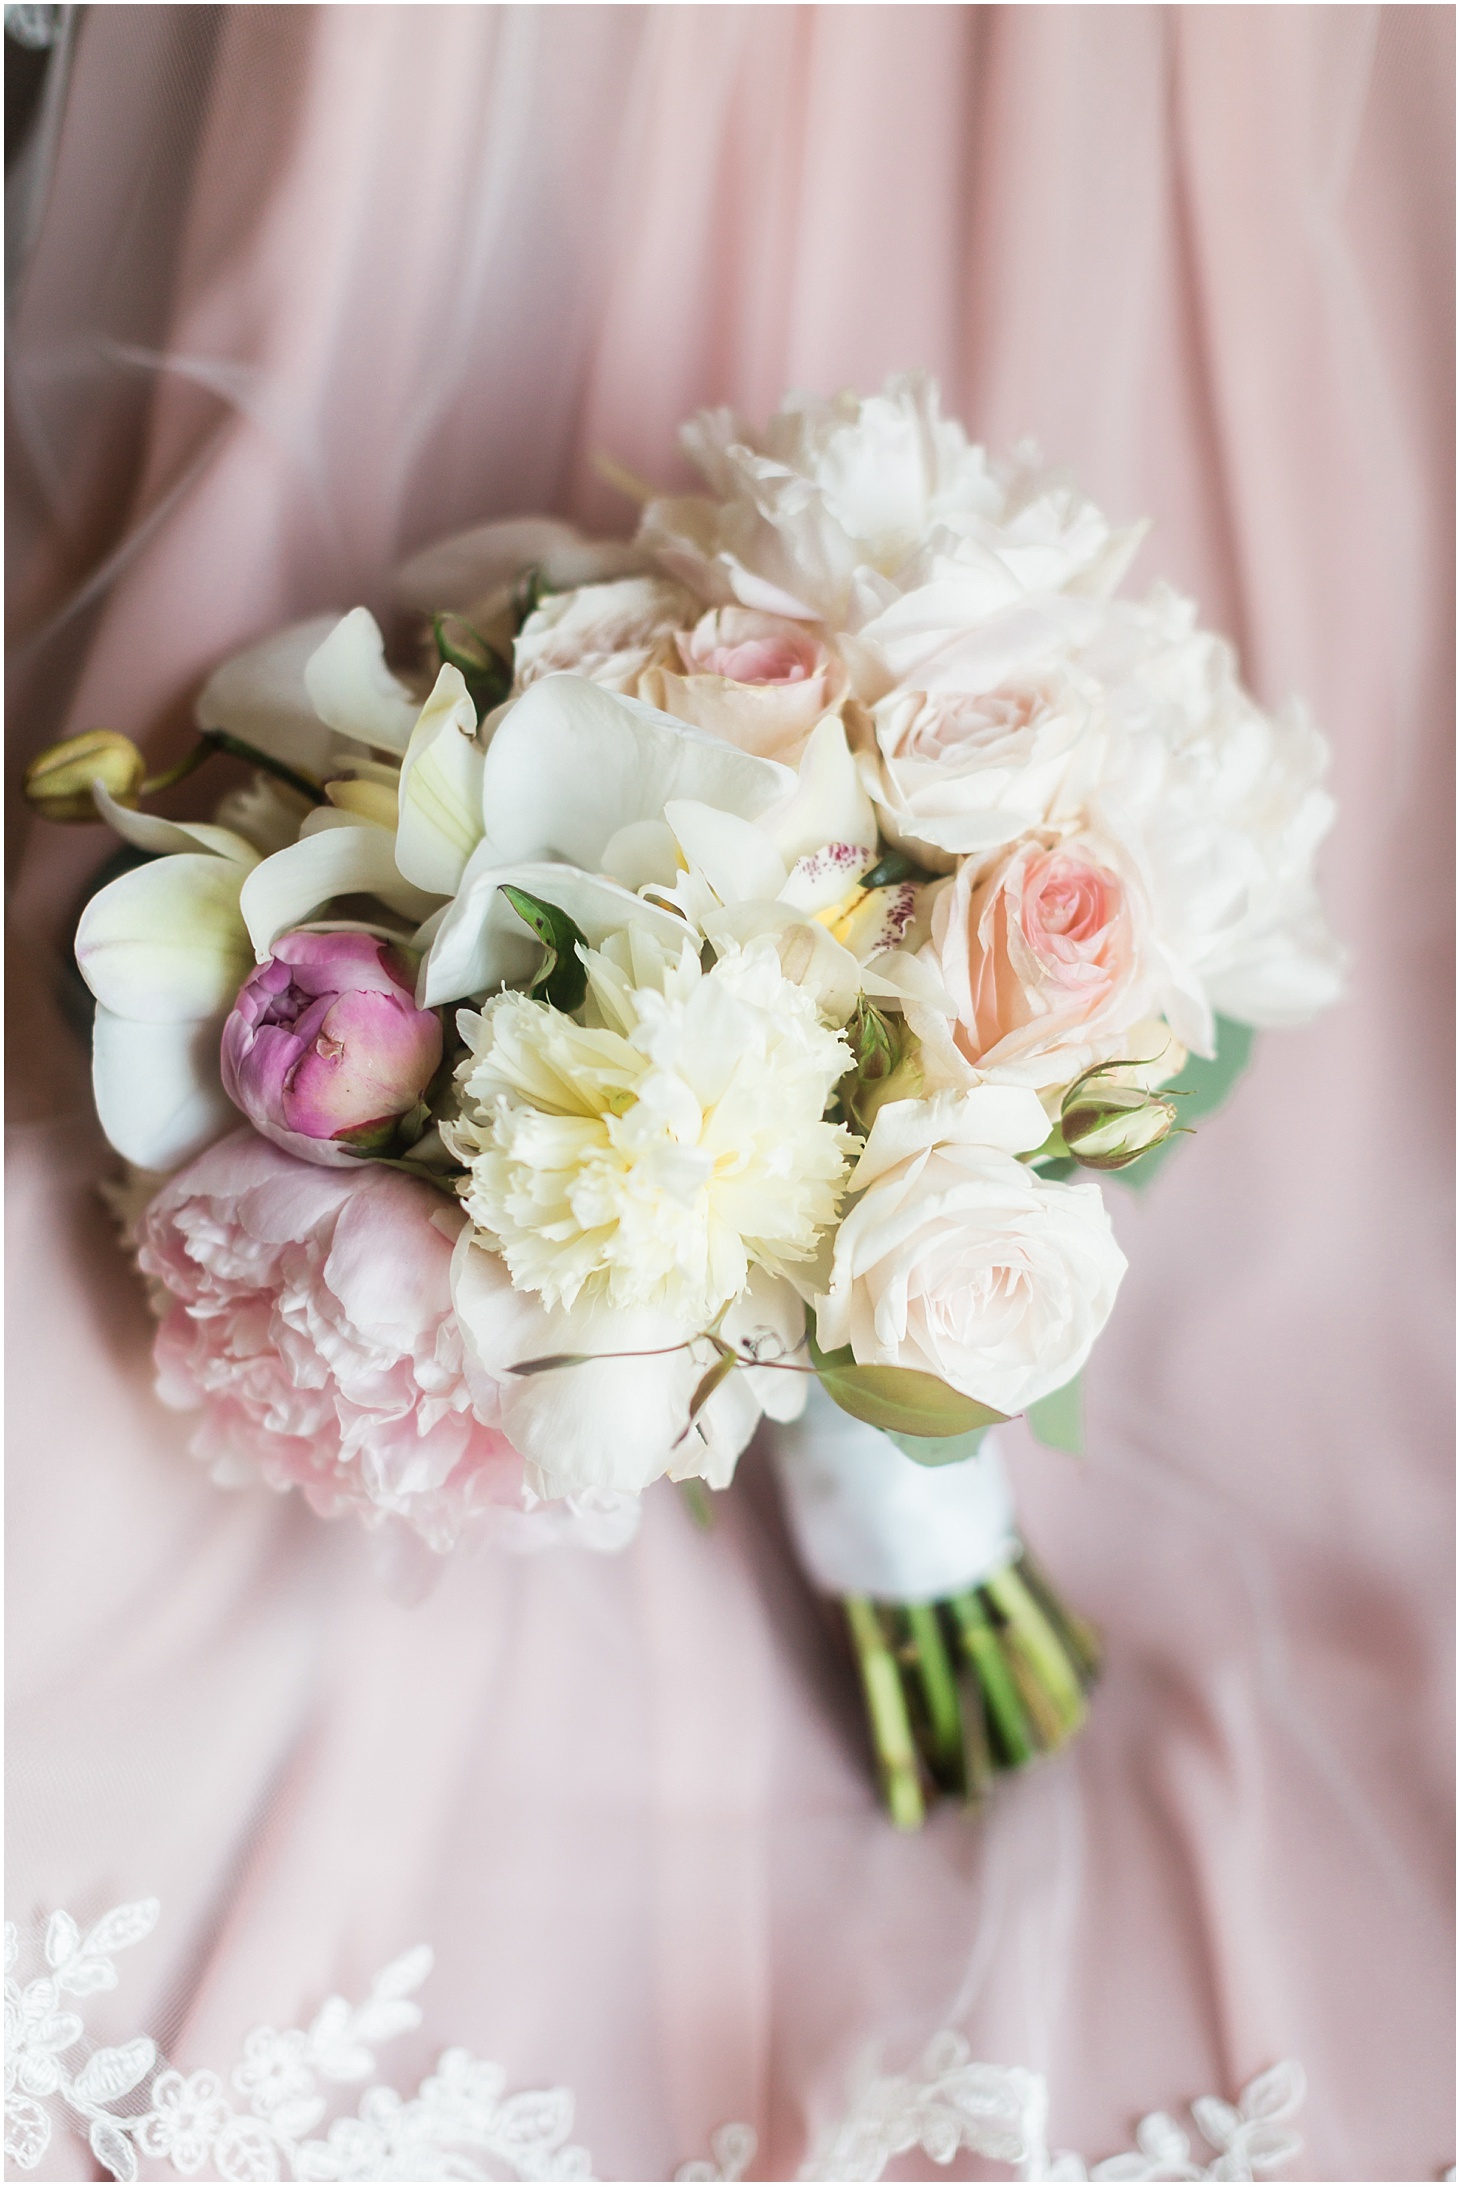 Bridal Bouquet at Willard Intercontinental Hotel in DC, Navy and Blush Summer Wedding at the Army and Navy Club,Ceremony at Capitol Hill Baptist Church, Sarah Bradshaw Photography, DC Wedding Photographer